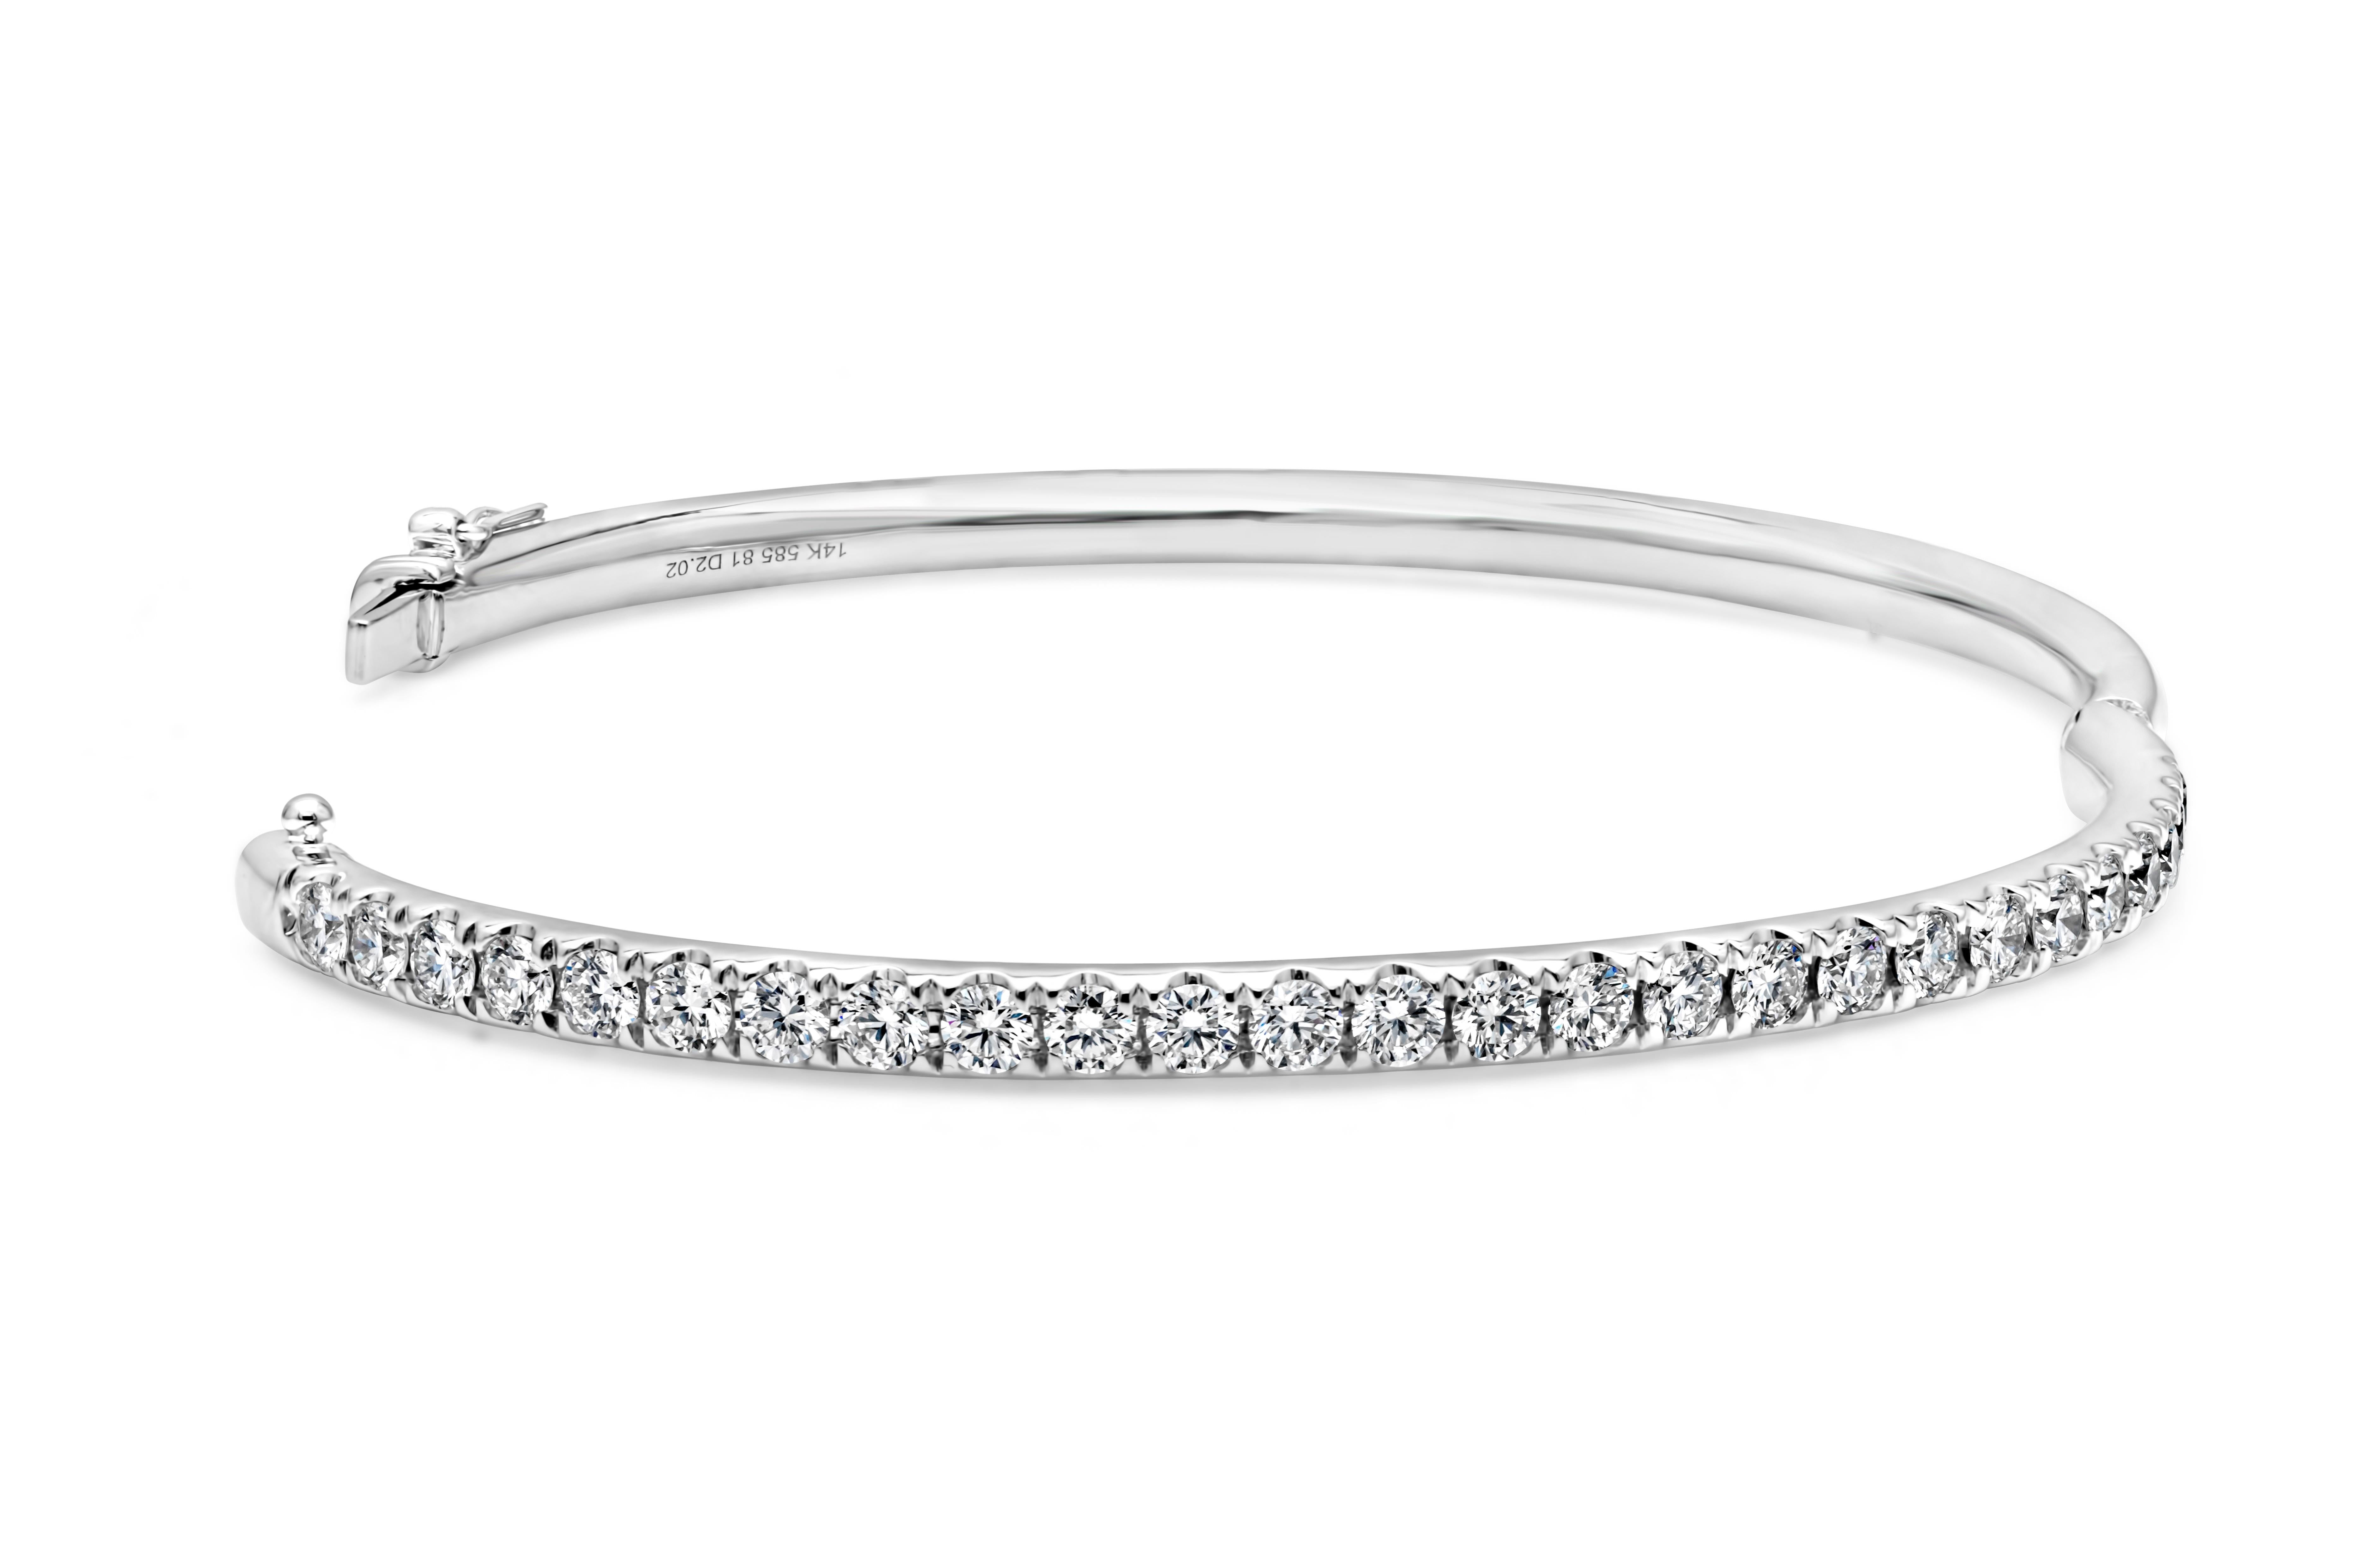 Showcasing a simple but elegant small wrist bangle bracelet set with 26 brilliant round cut diamonds weighing 2.02 carats total, F color and VS-SI1 in clarity. Has a clasp to slip and wear the bangle securely. Finely made in 14K White Gold and 6.50